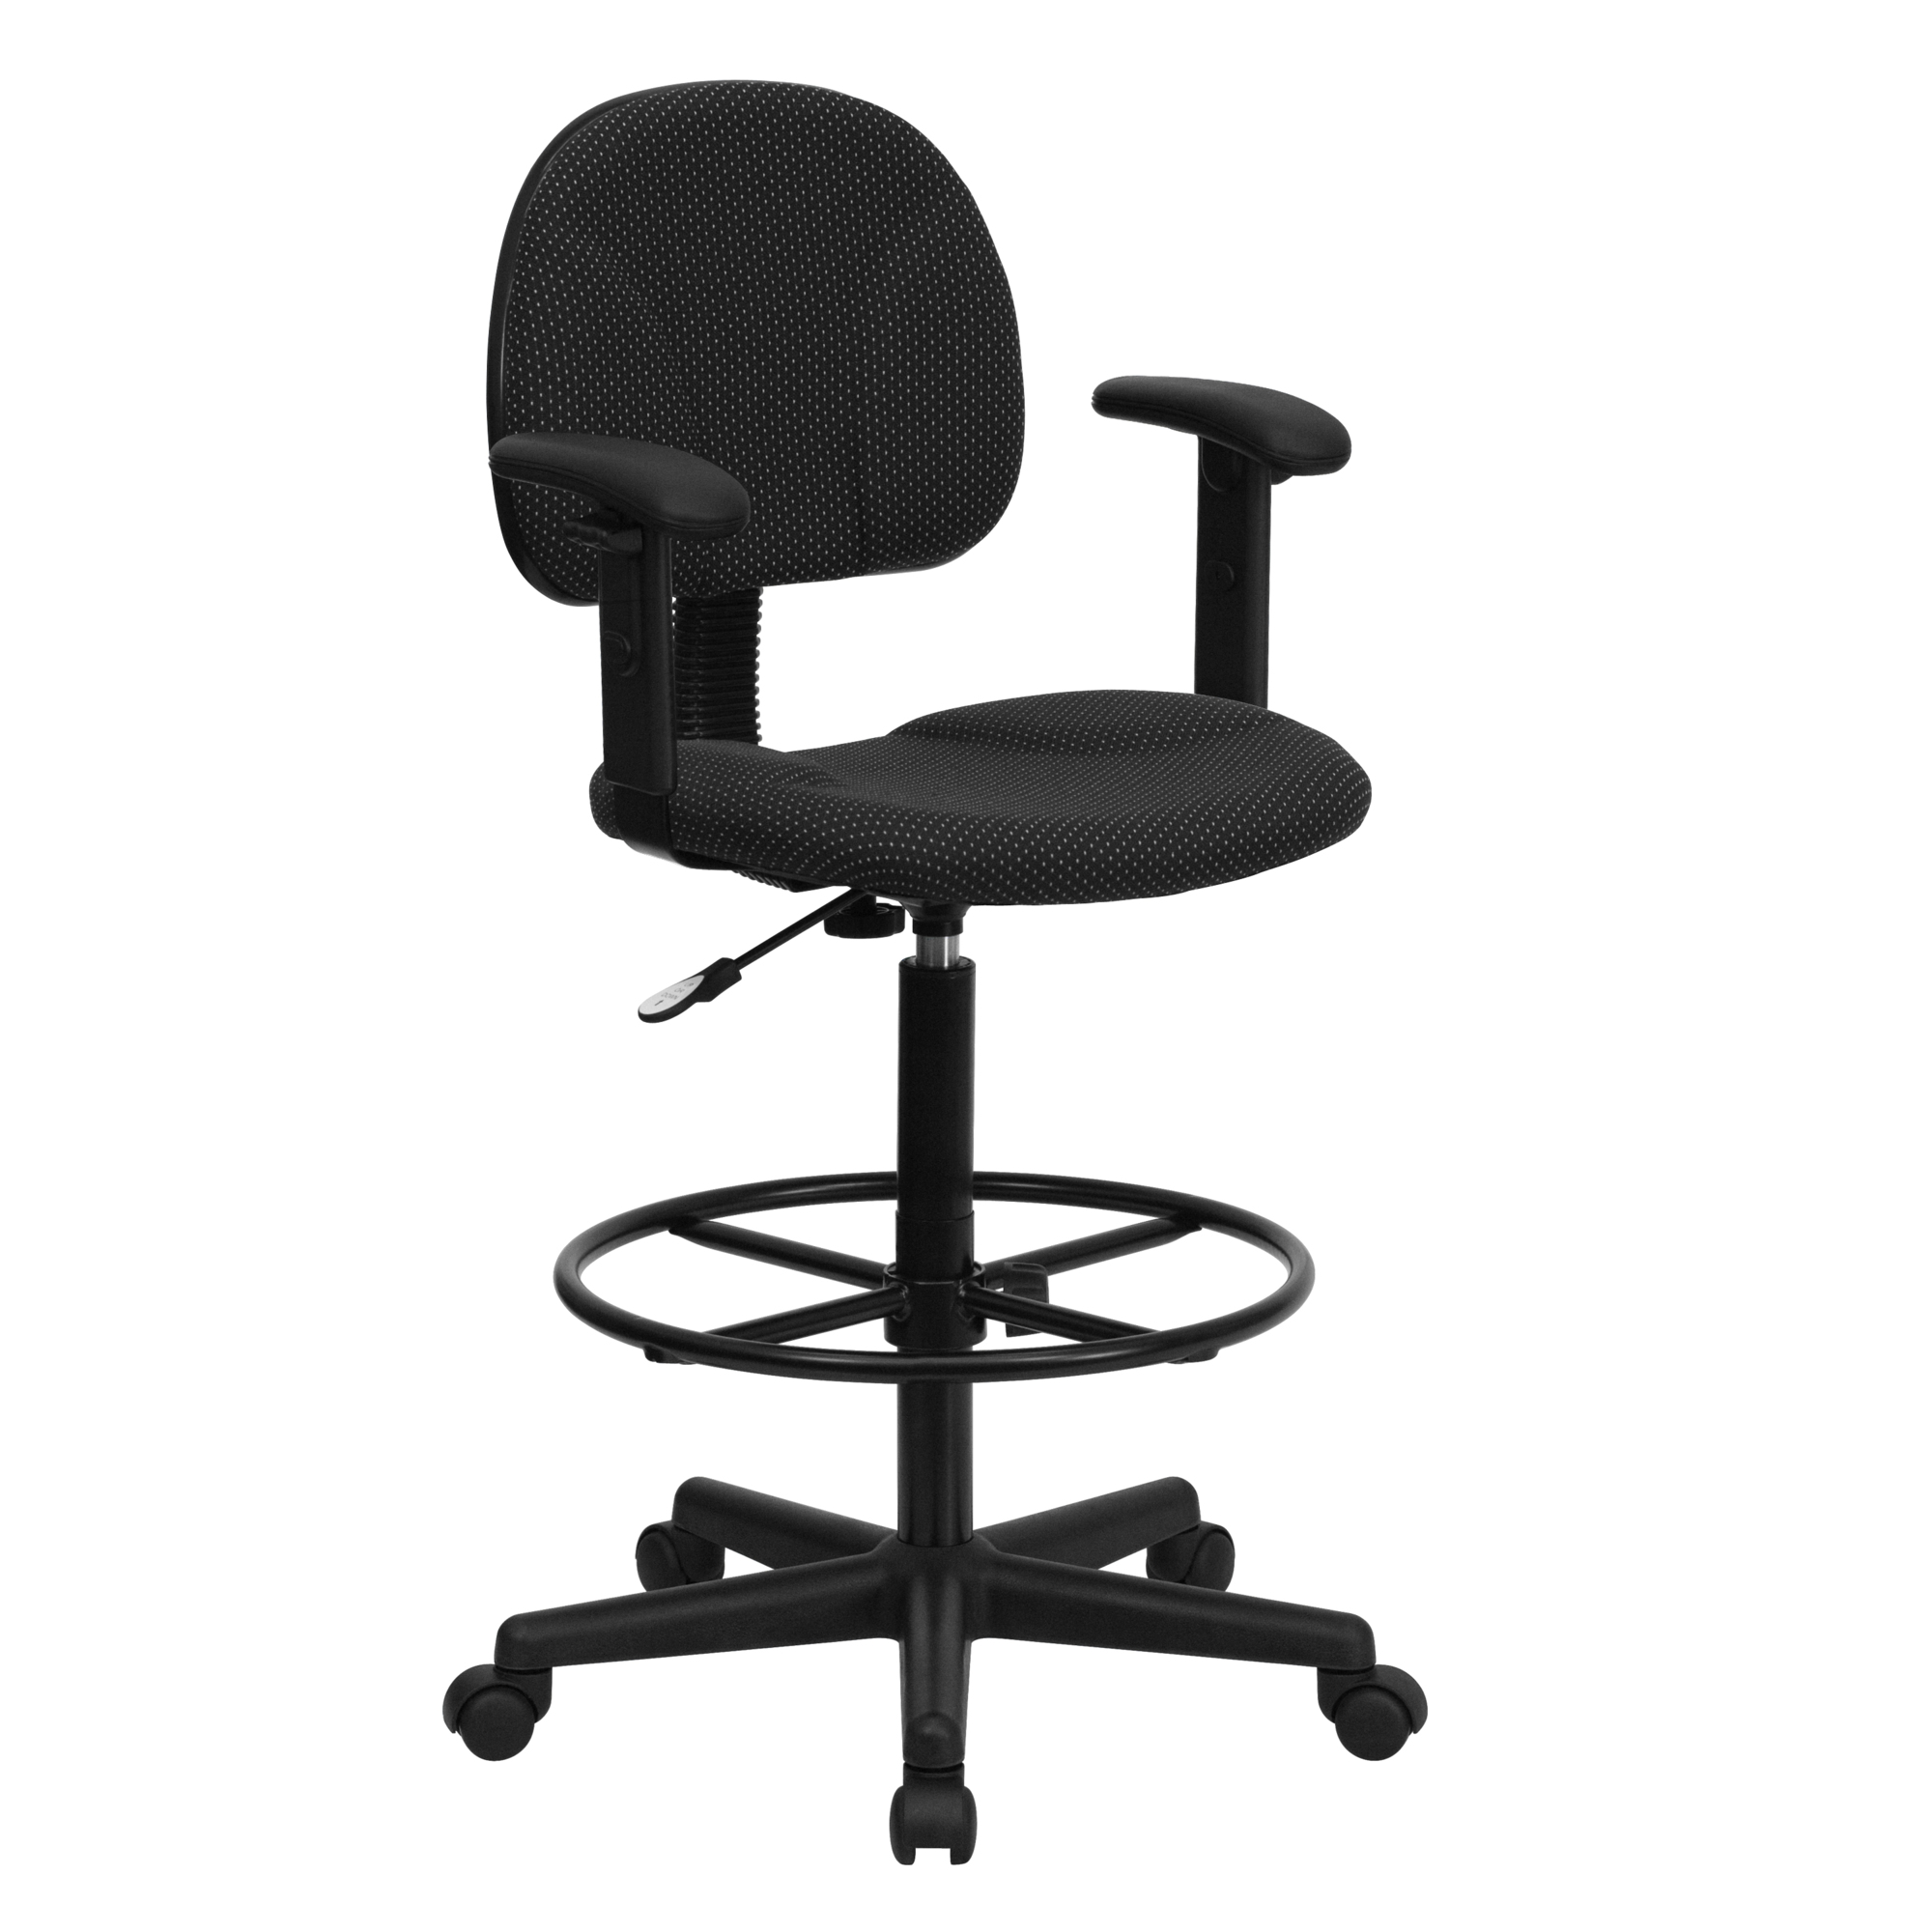 Flash Furniture, Black Fabric Drafting Chair with Adjustable Arms, Primary Color Black, Included (qty.) 1, Model BT659BLKARMS